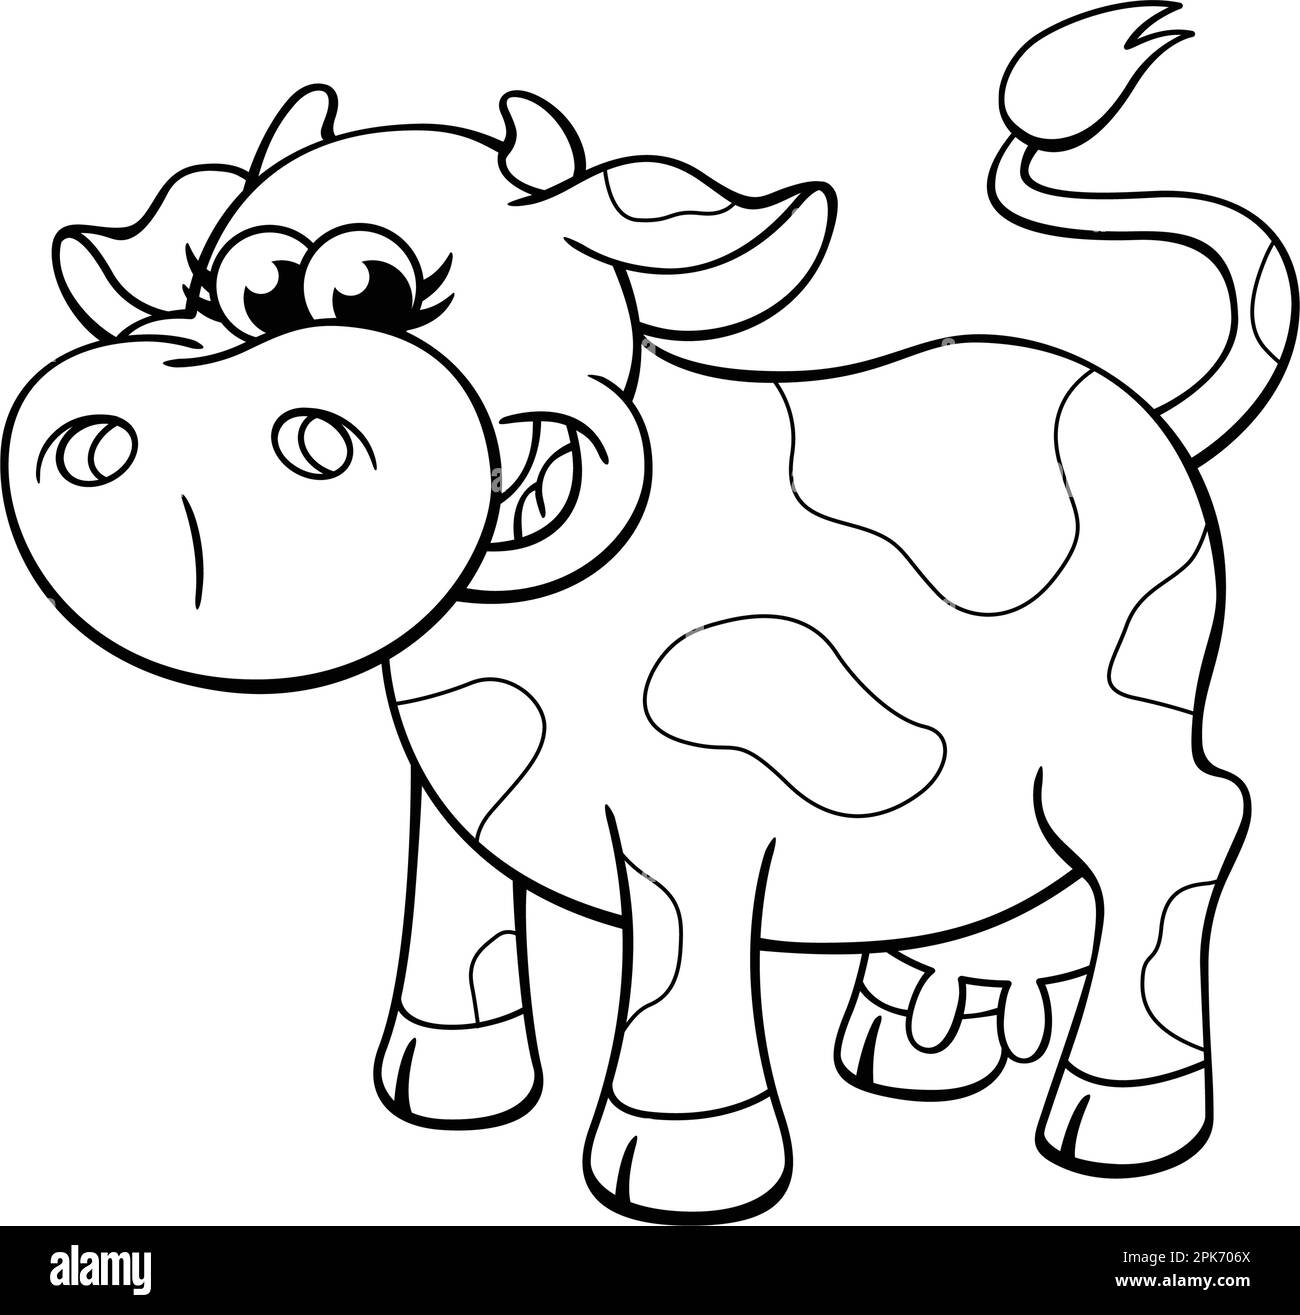 Cute smiling cartoon farm cow for coloring colouring in book image ...